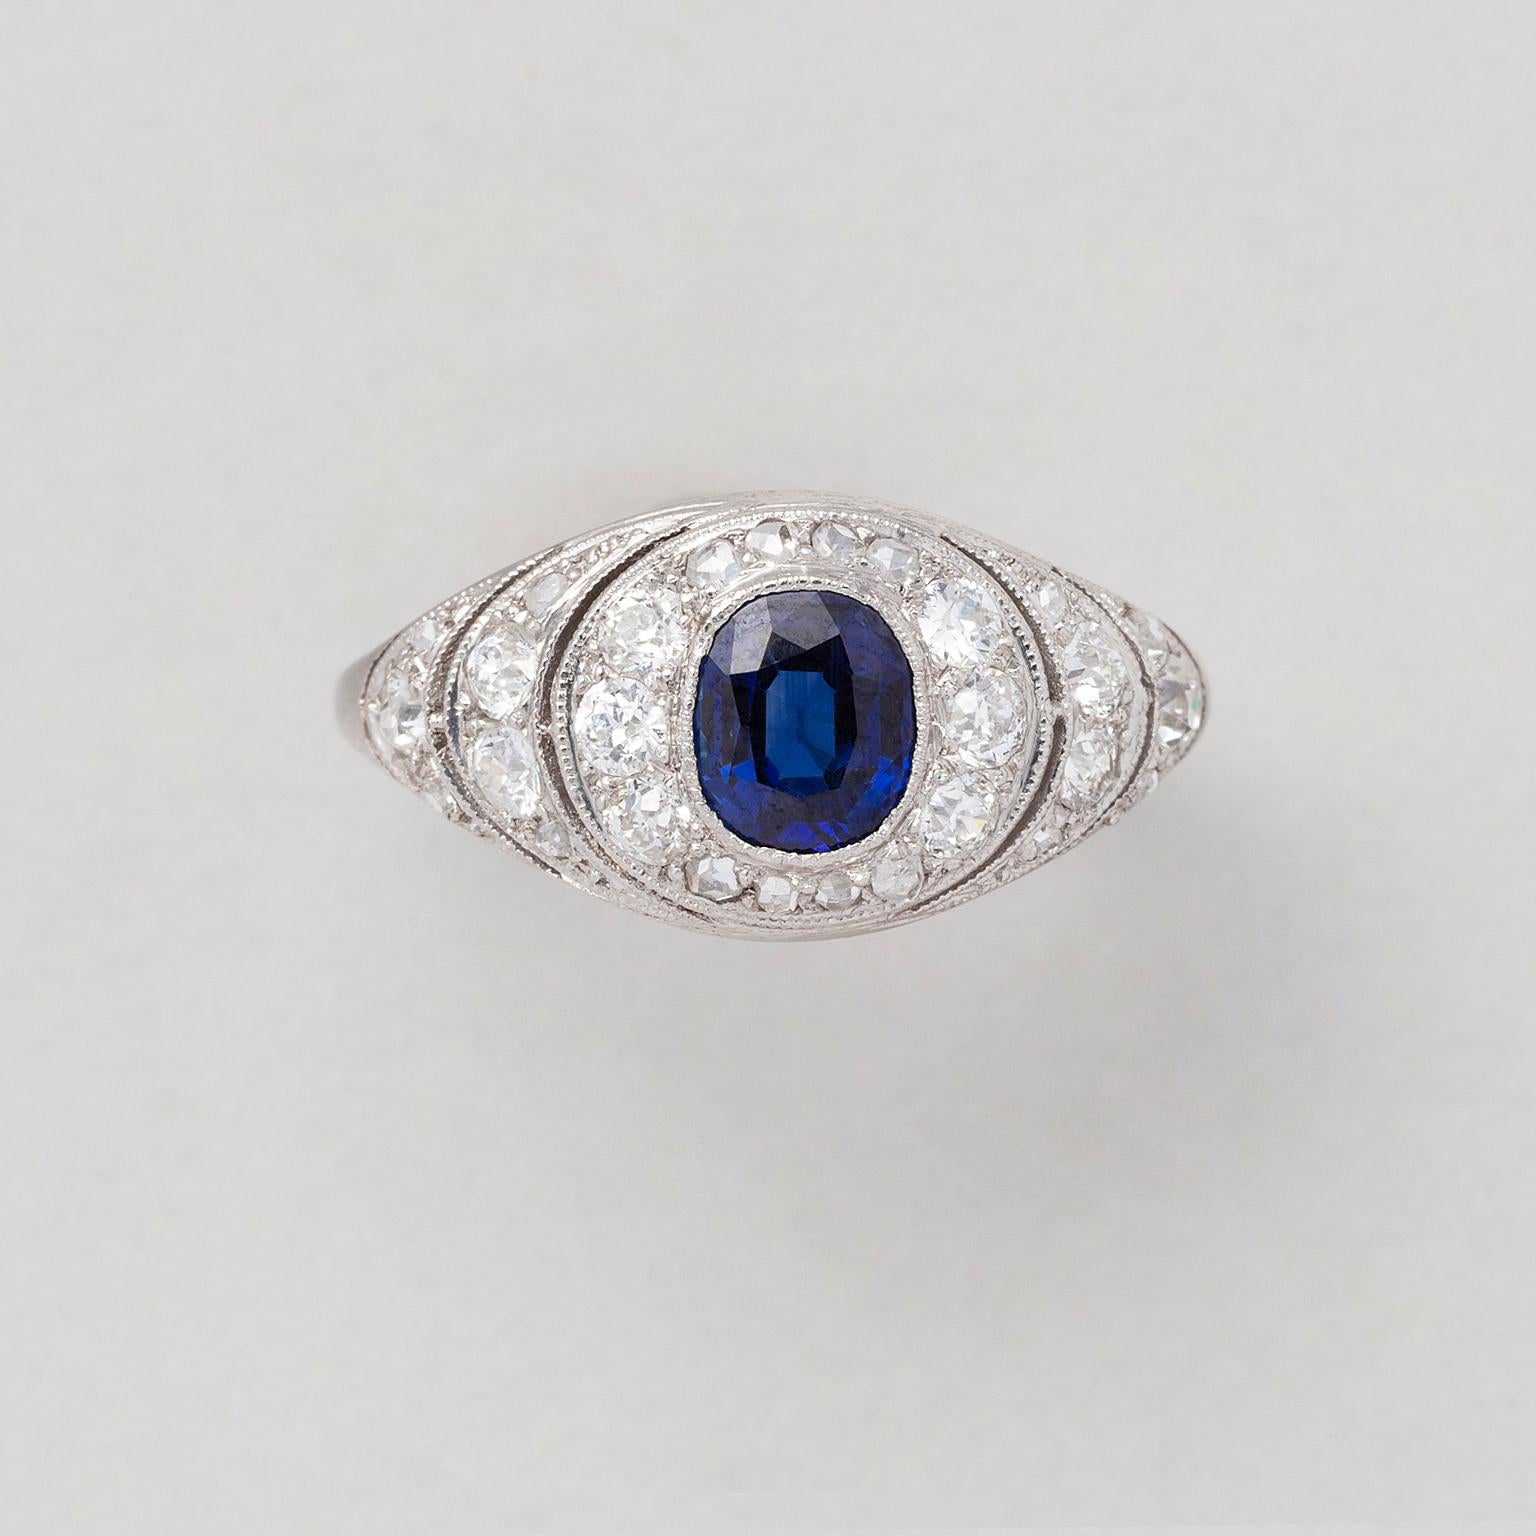 An Art Deco platinum and diamond cluster ring set with a natural unheated cushion cut sapphire (app. 1.01 carat) in the middle and brilliant cut, pavé set diamonds (app. 0.99 carat in total) all around, most likely English in origin, circa